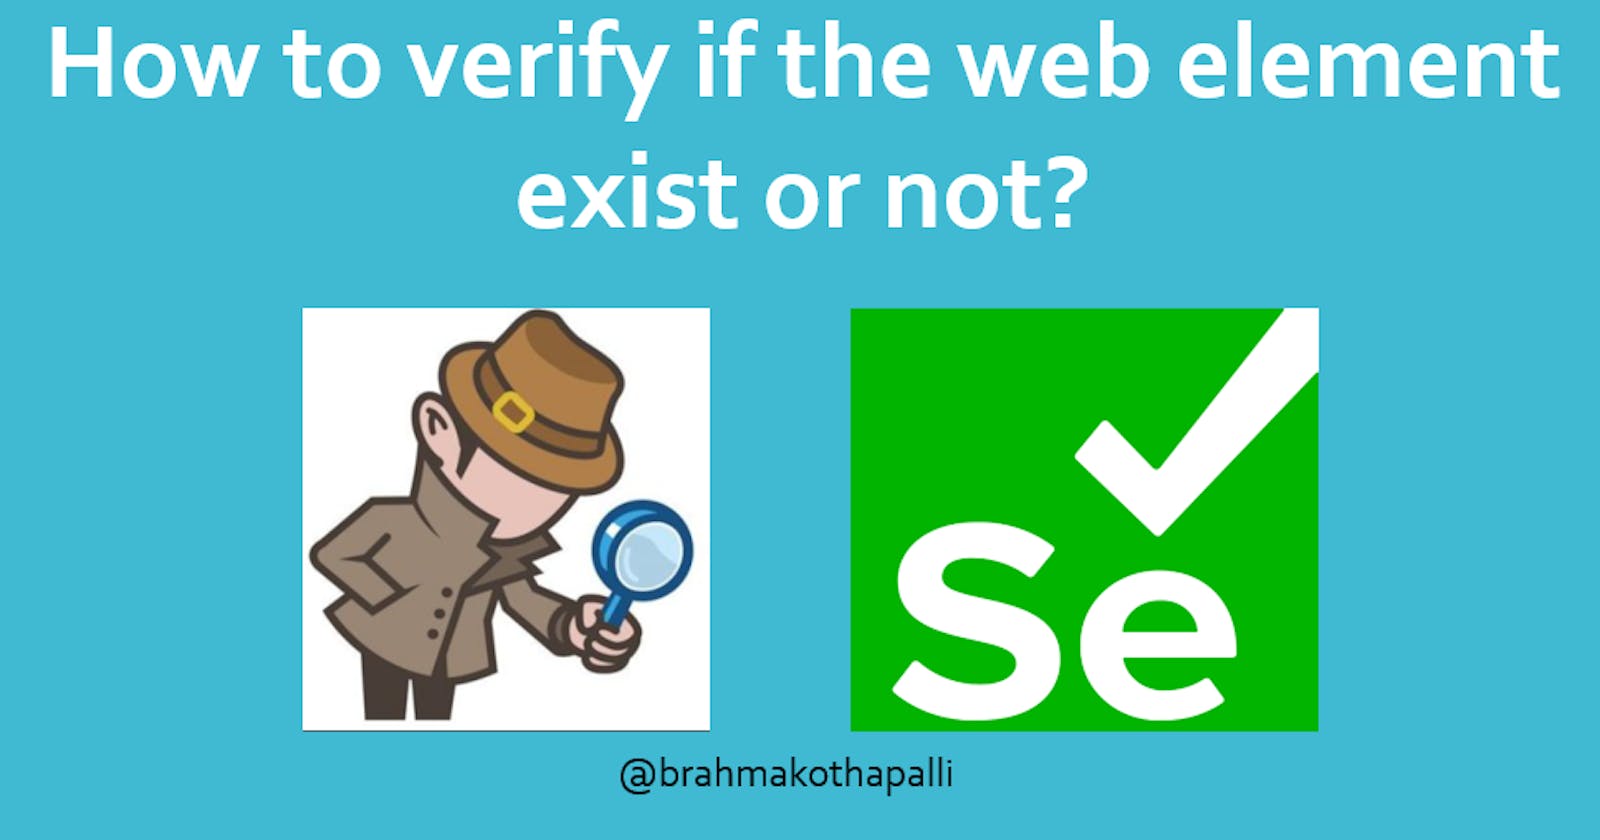 How to verify if the web element exist or not?